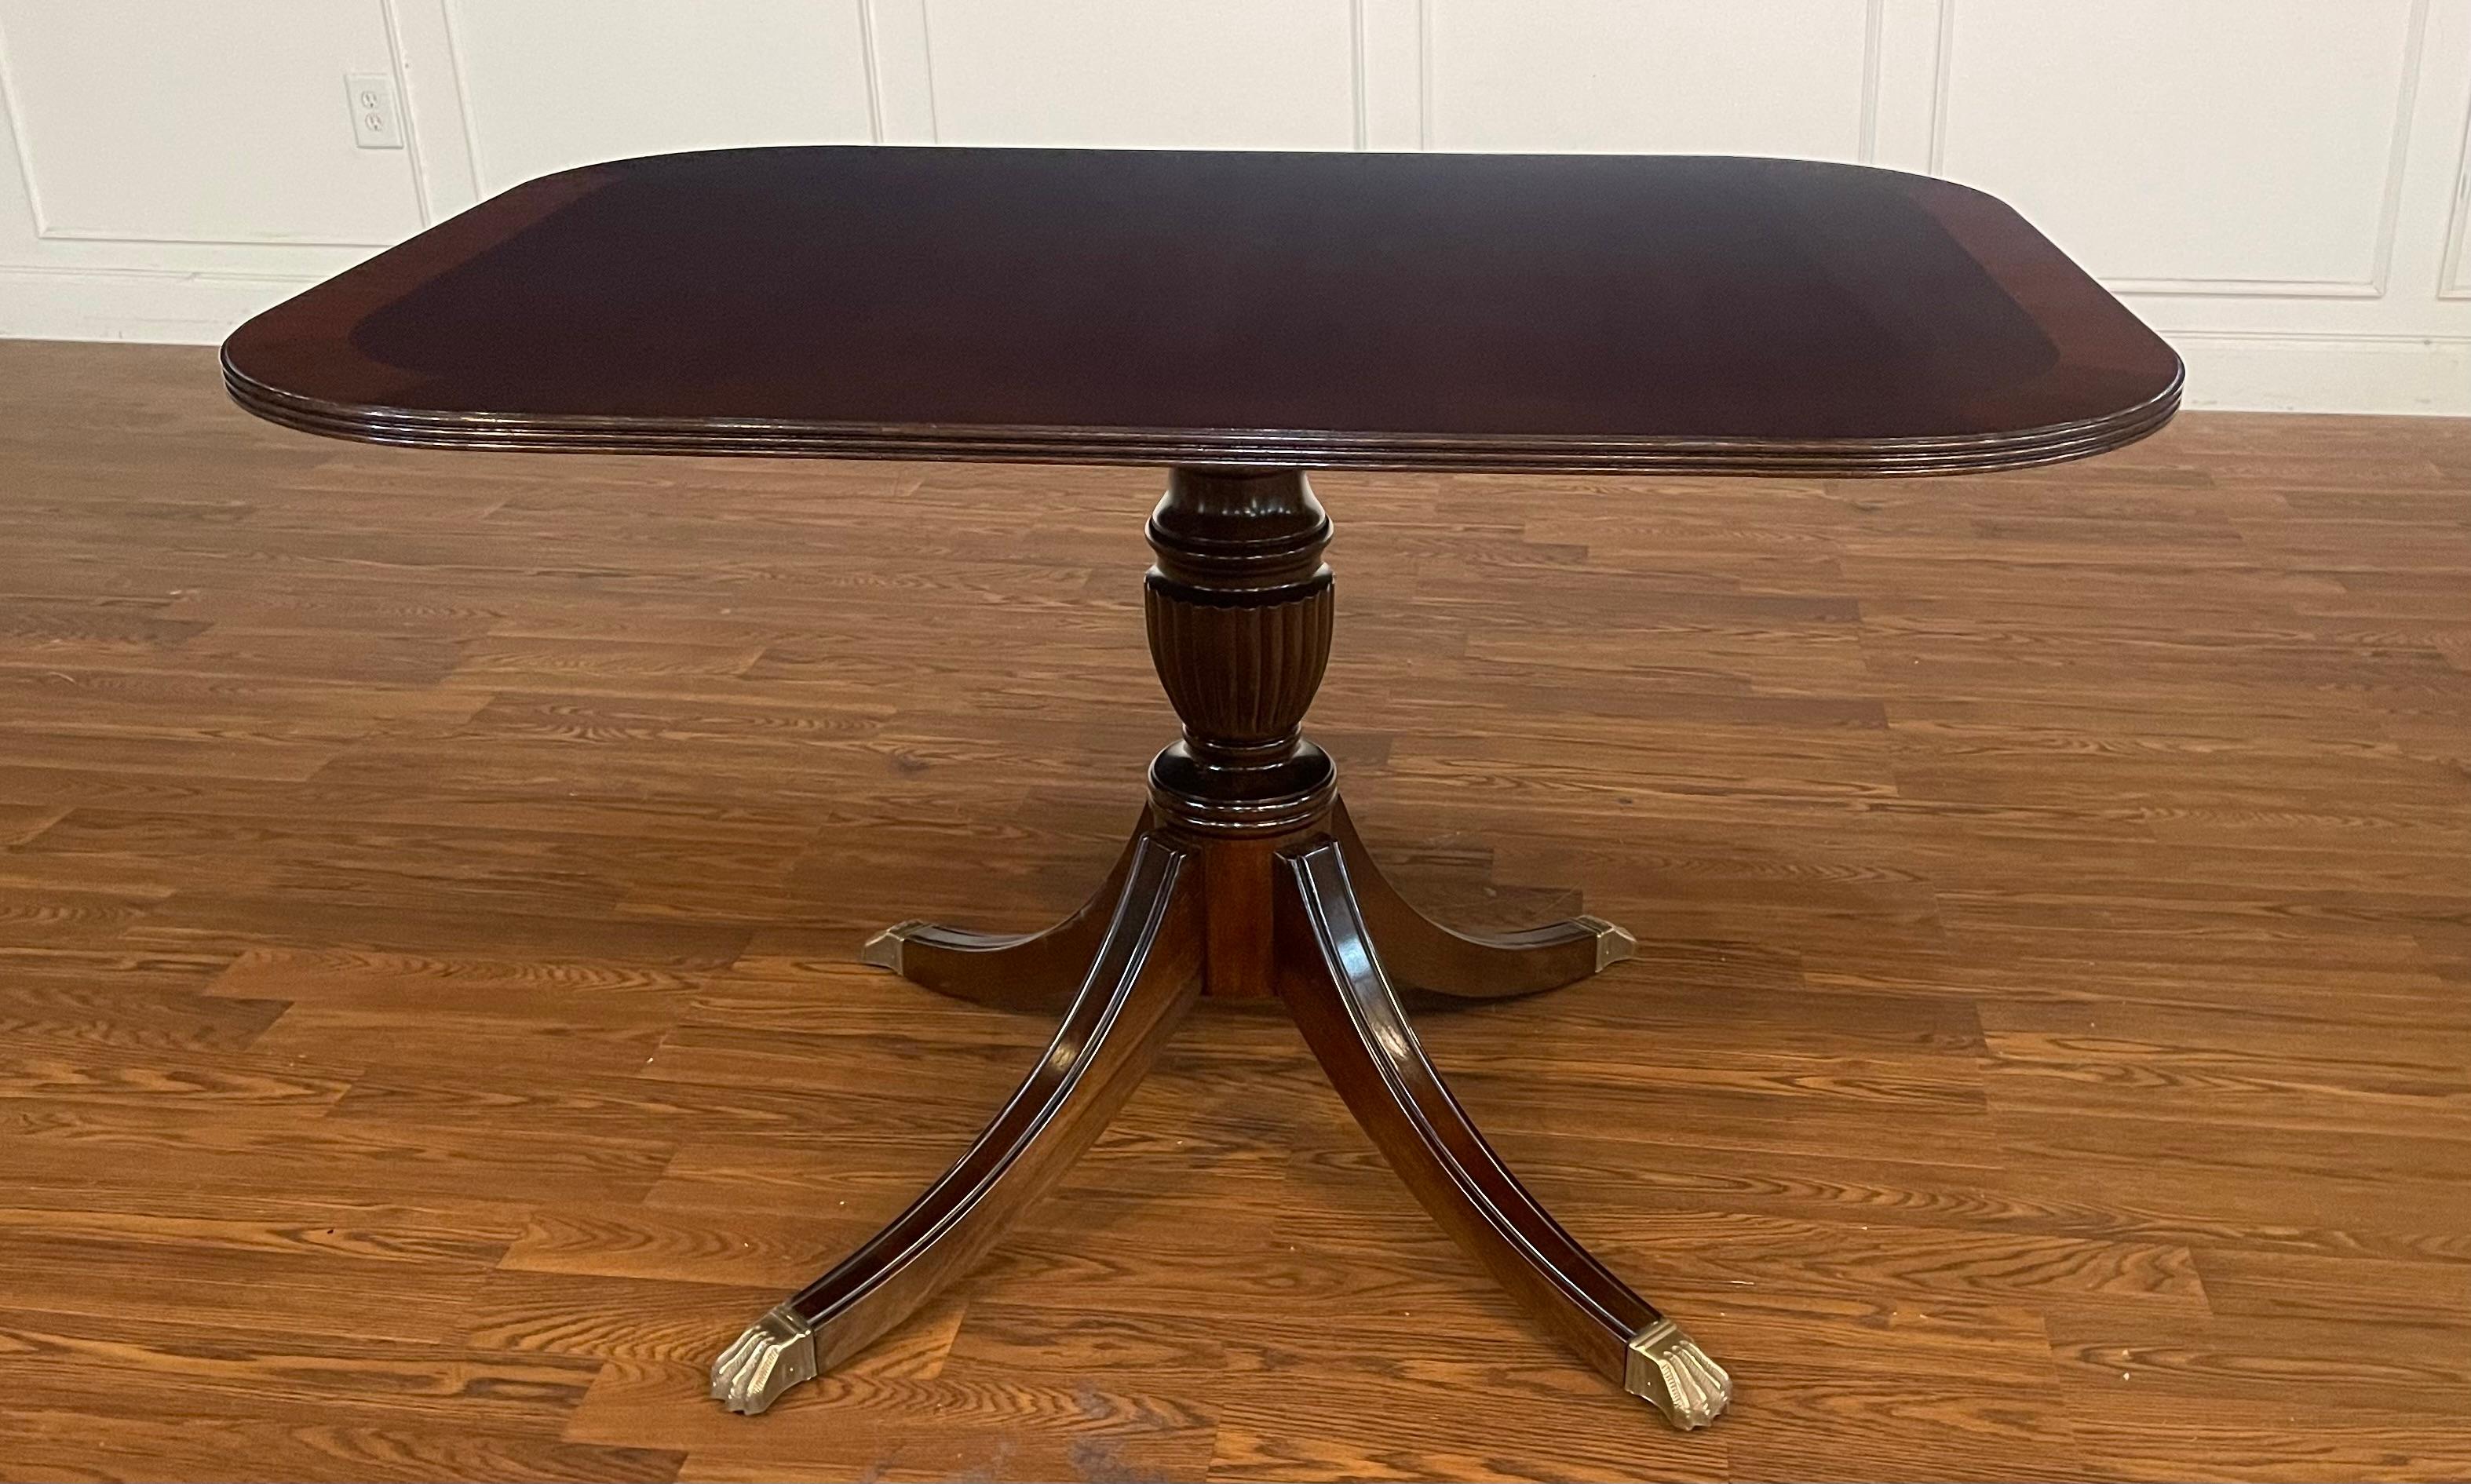 This is a mahogany breakfast table made-to-order in the Leighton Hall shop in Suwanee, Georgia.  It is very versatile and can have multiple uses.  It can be used as a breakfast table, game table, foyer table, writing table, or dining table for a